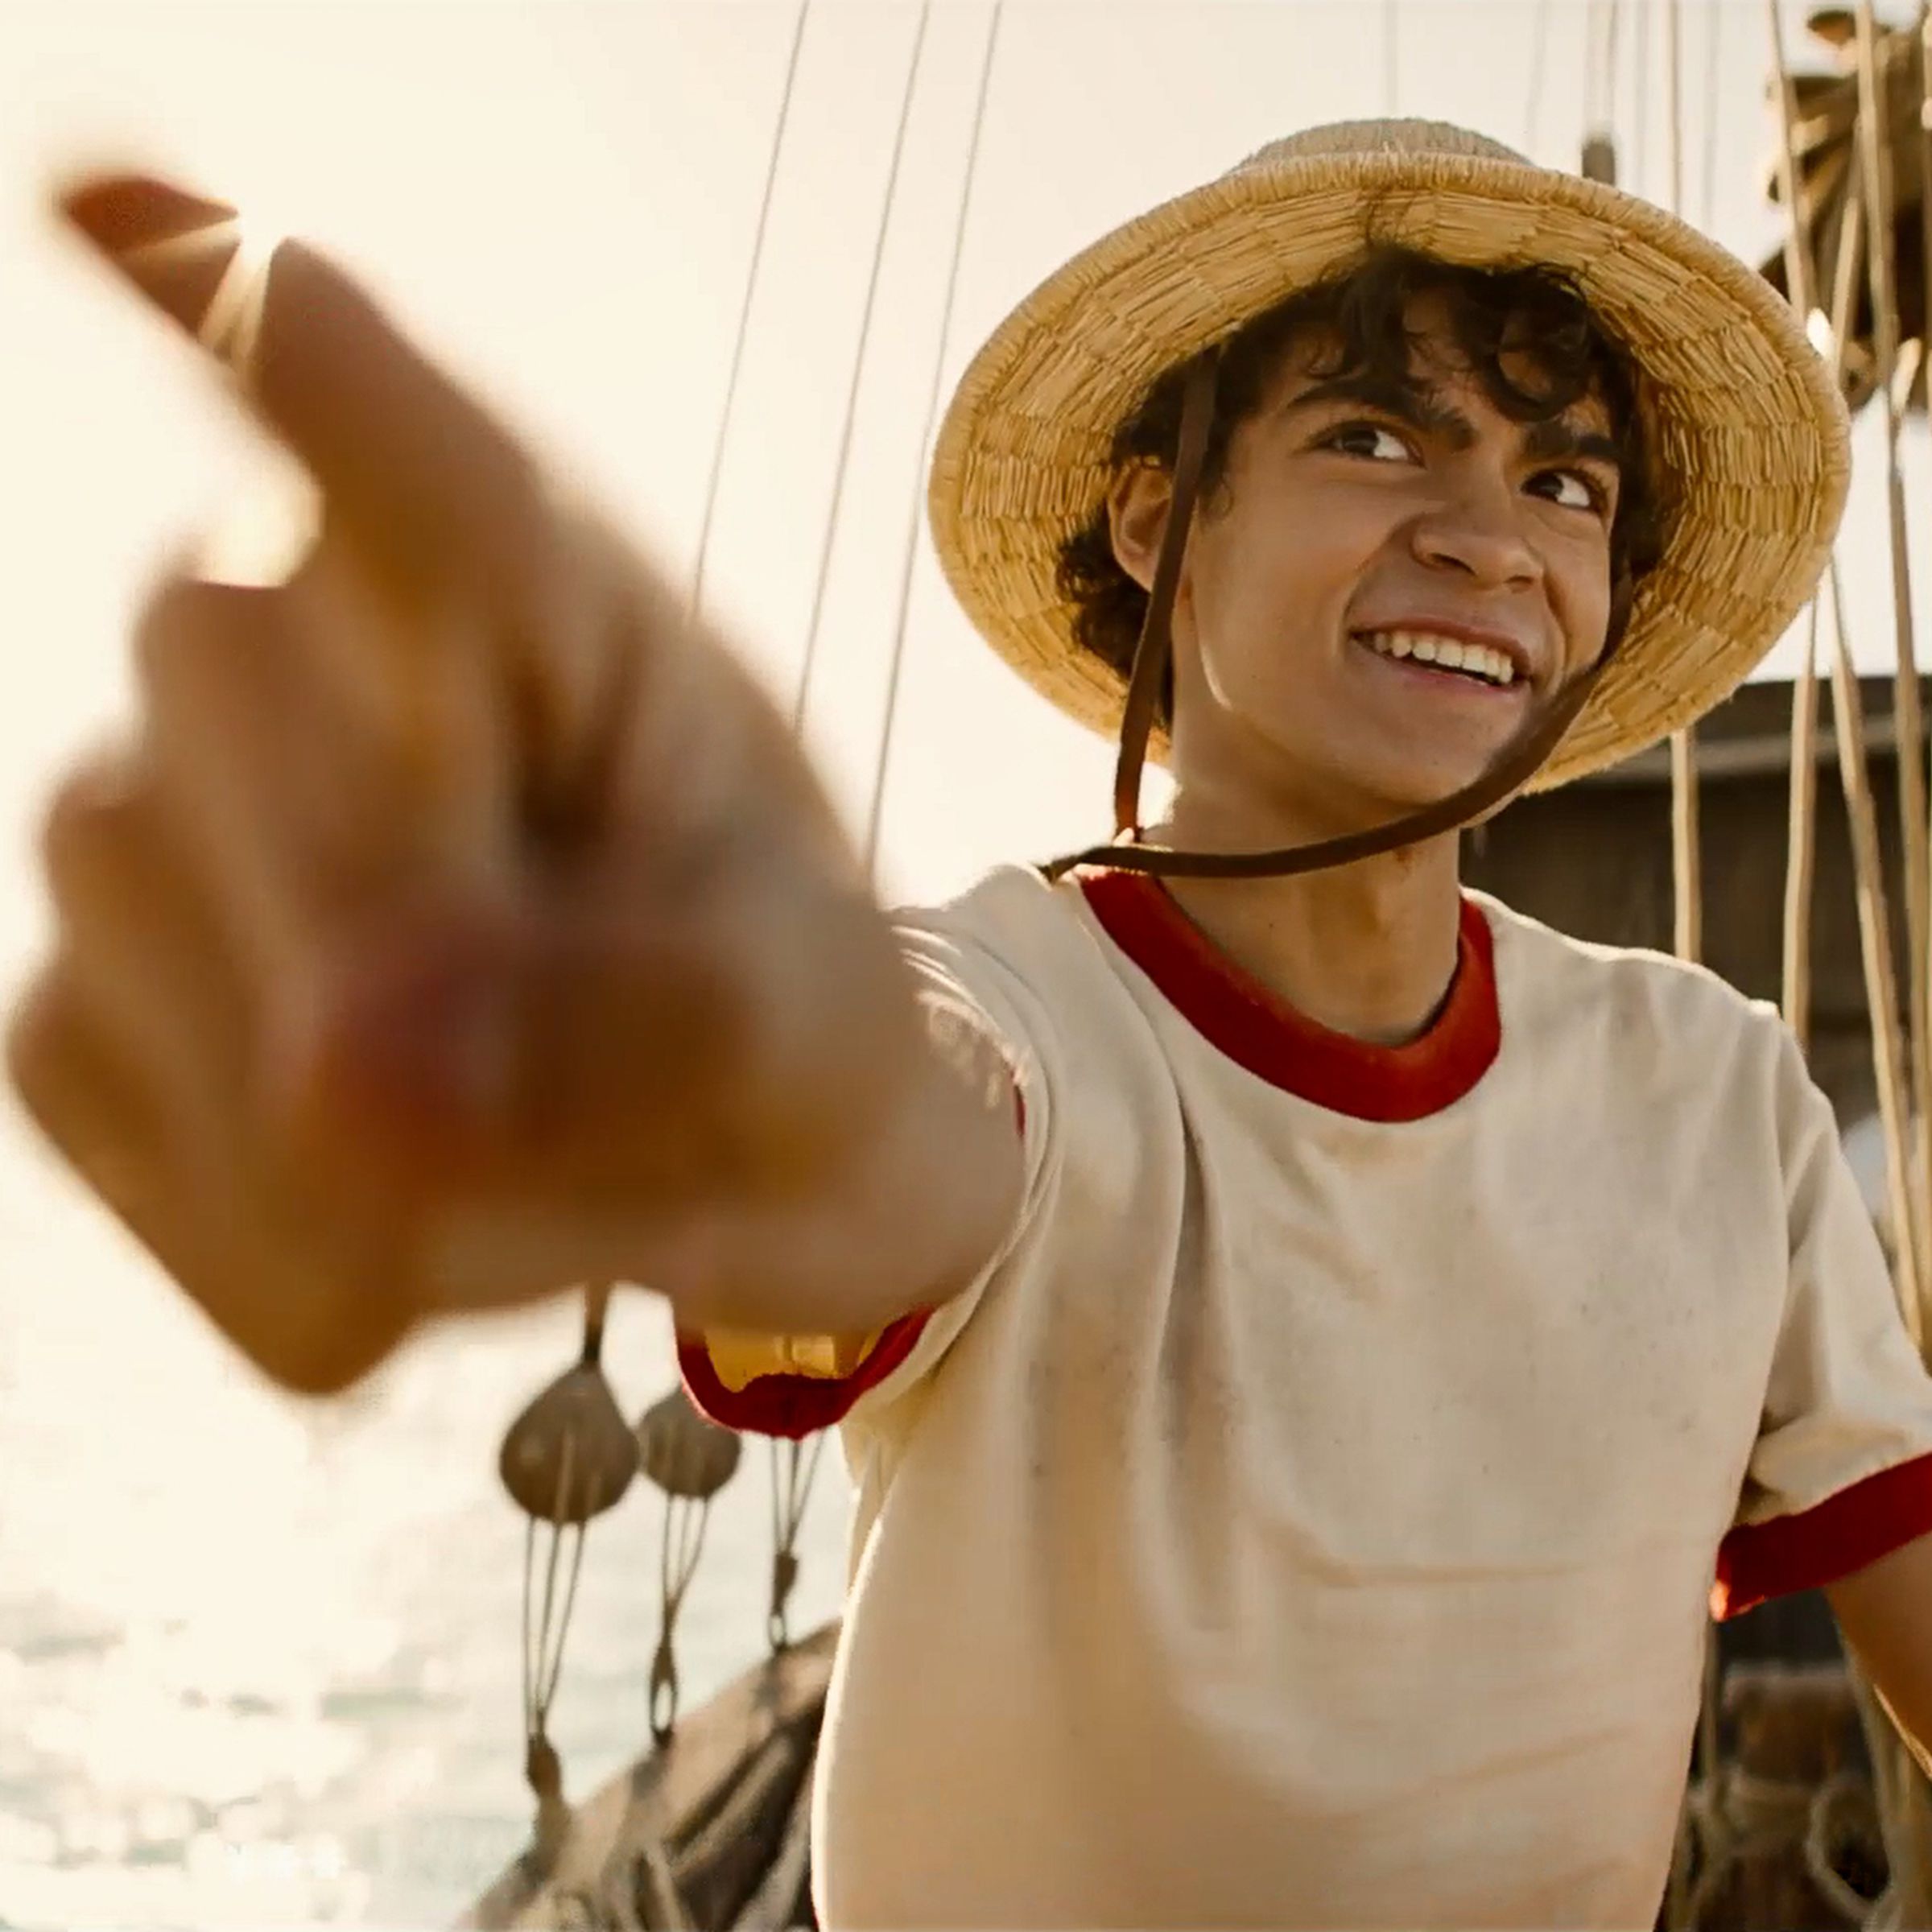 A boy wearing a straw hat and a white t-shirt ringed with red around the collar and sleeves. The boy is smiling, pointing towards the camera, and standing on the deck of a boat.